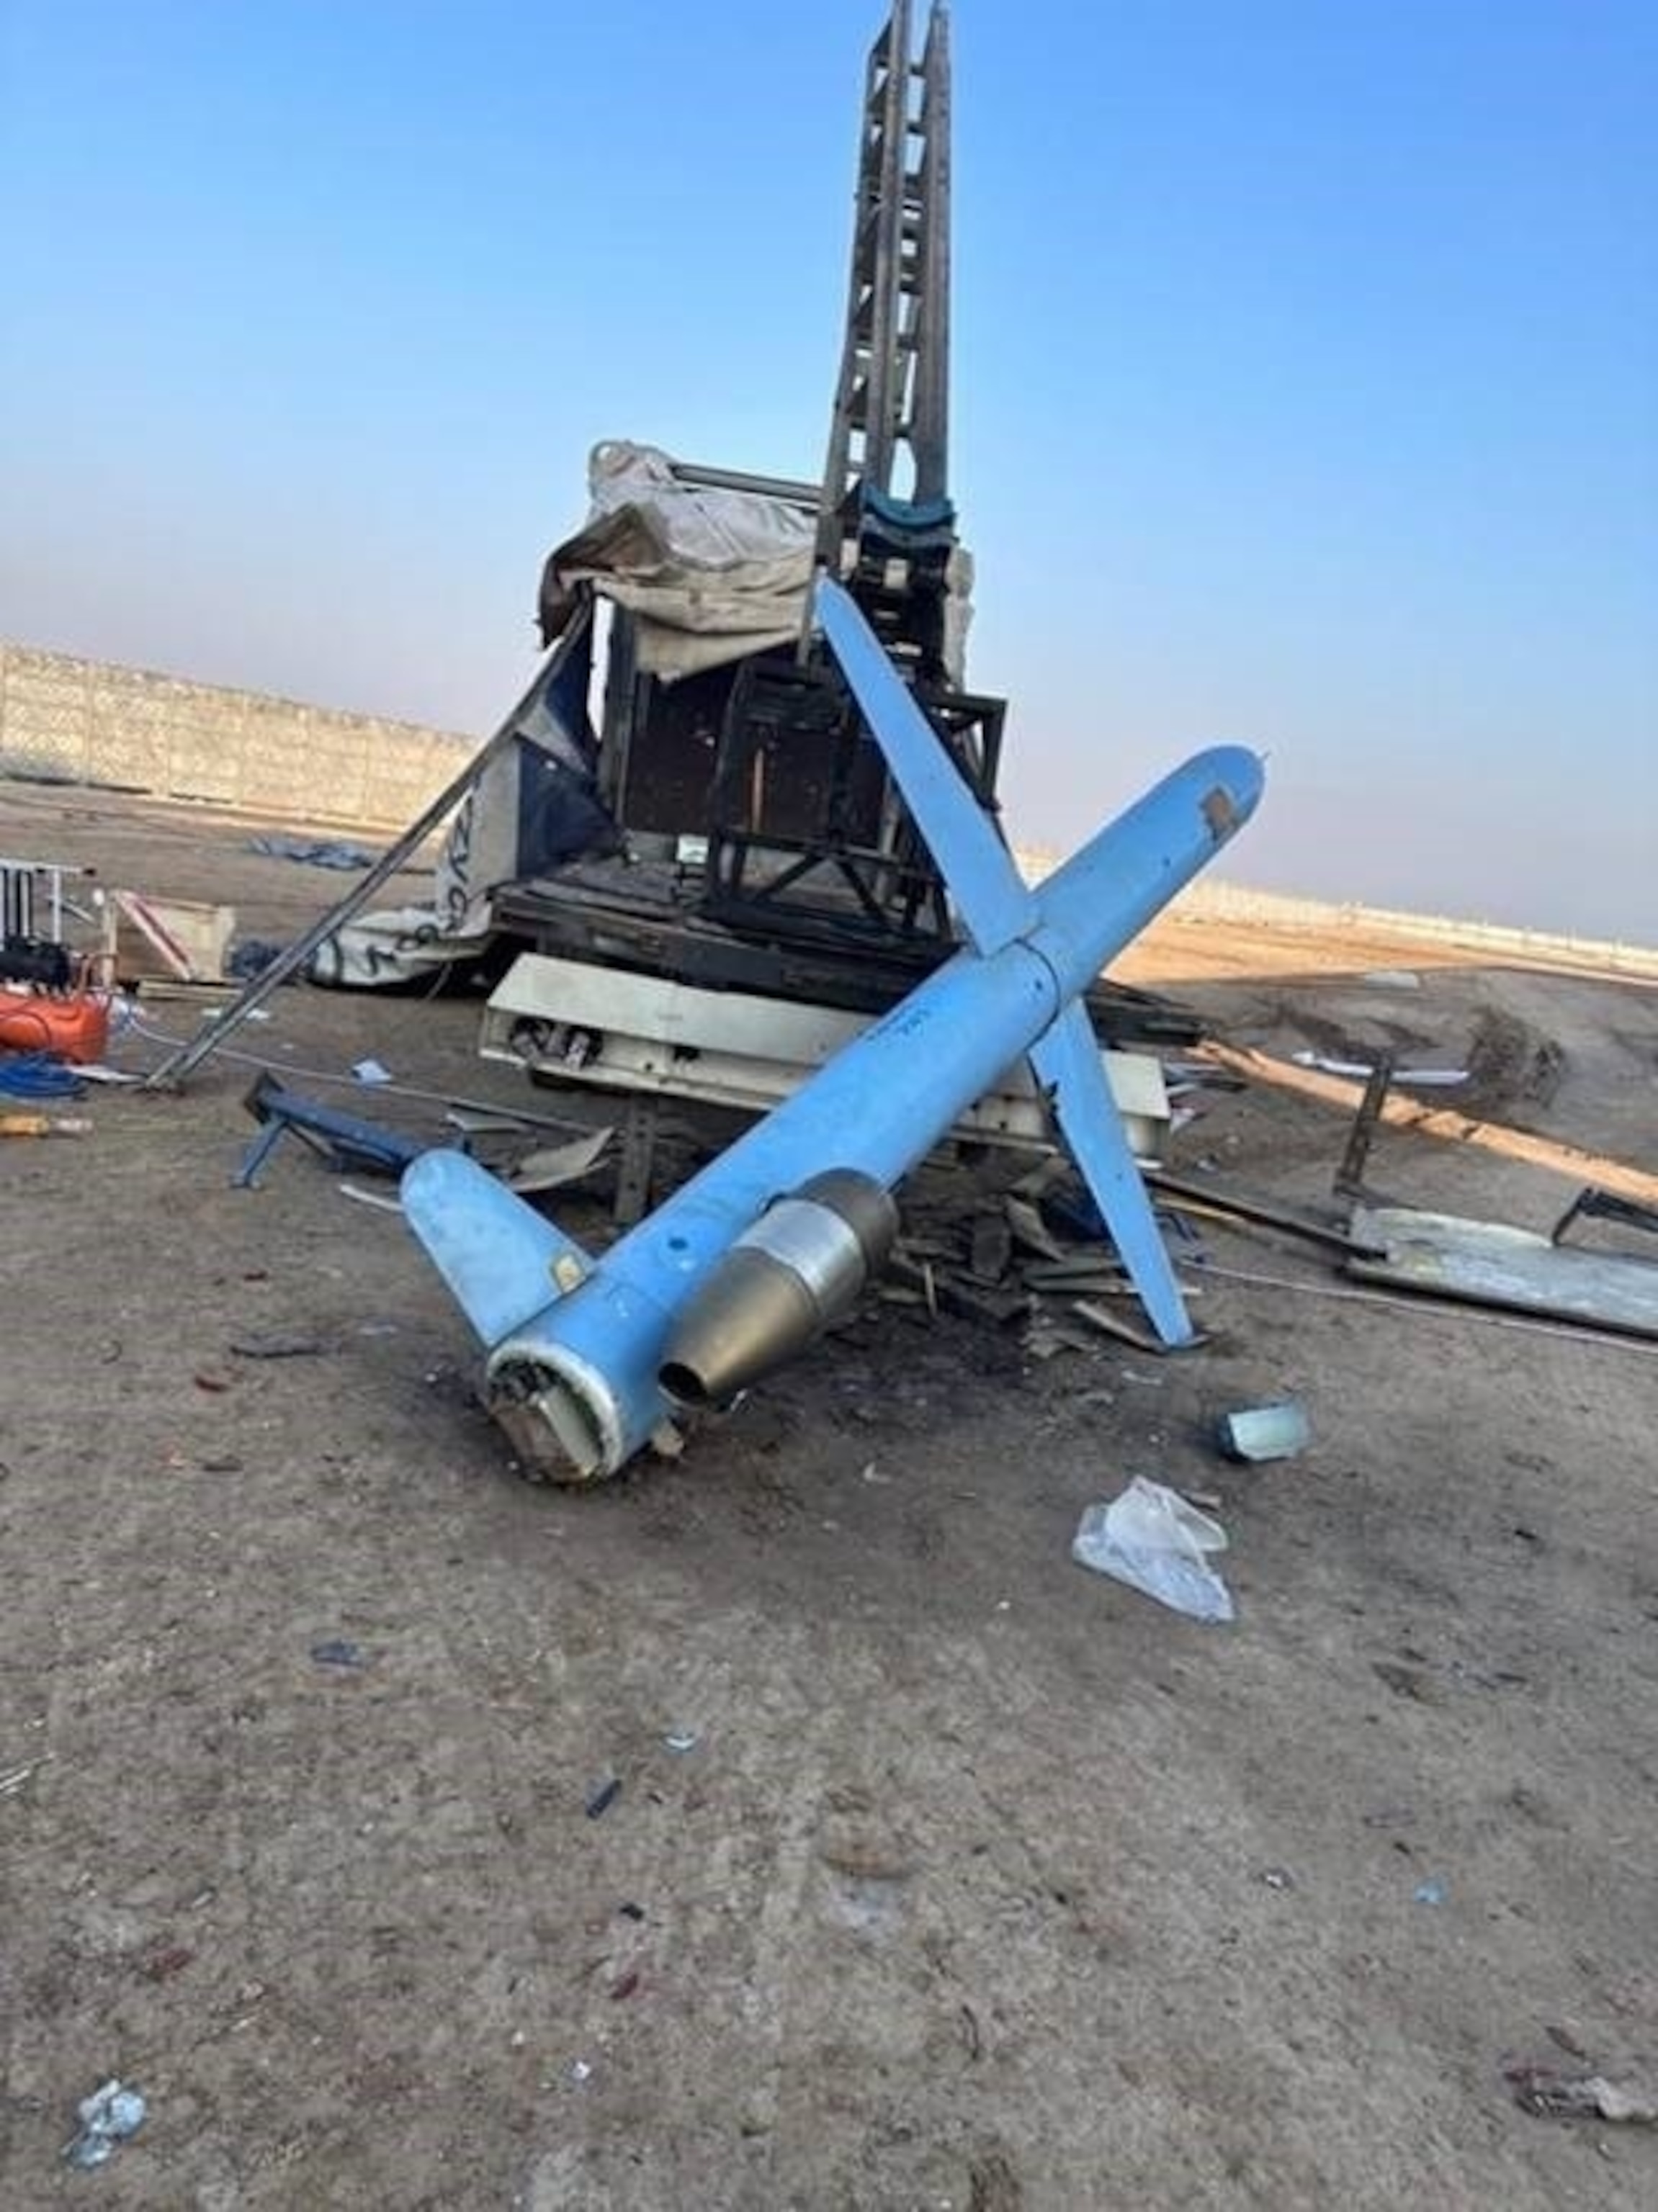 Iraqi police in Babylon discovered a land attack cruise missile of Iranian design that failed to launch on Jan. 3. 